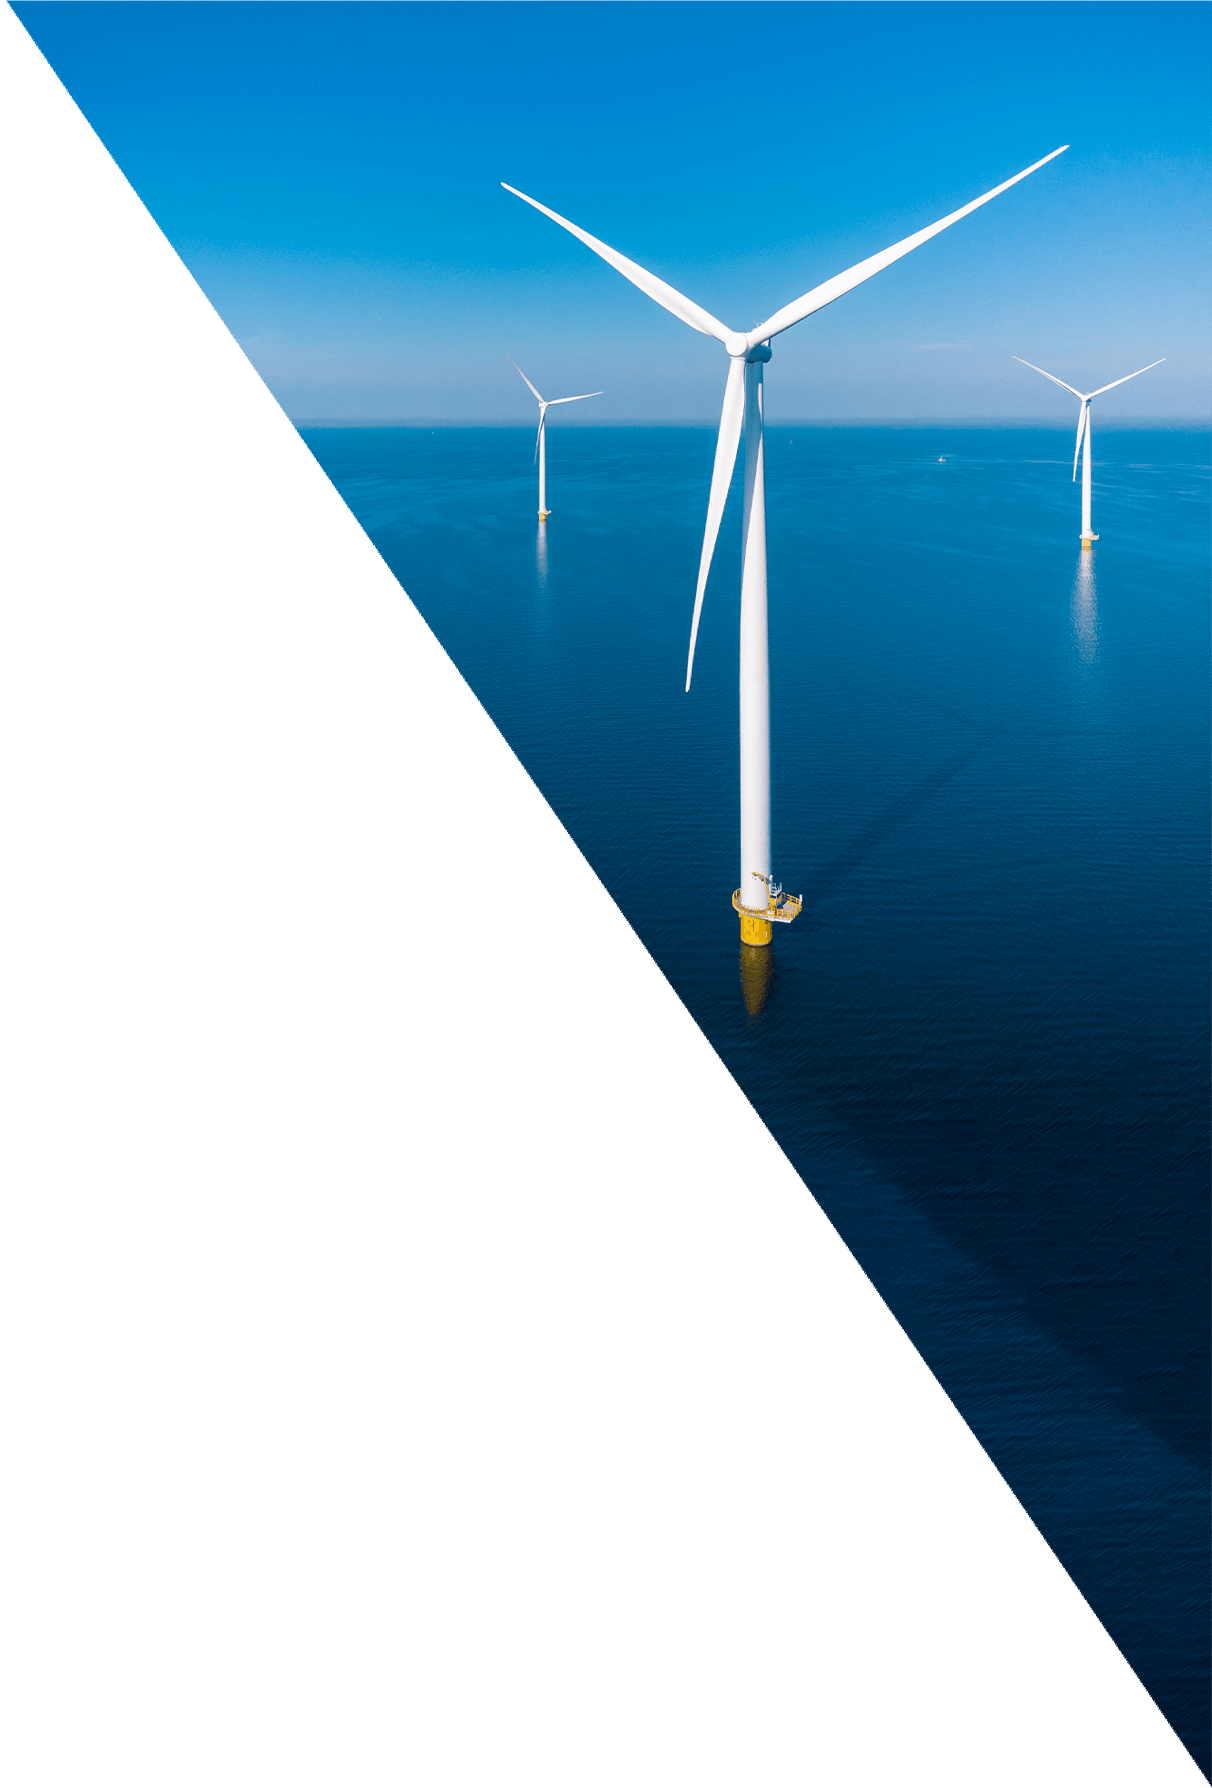 The offshore renewable energy market consists of offshore wind energy, tidal energy and supporting facilities.